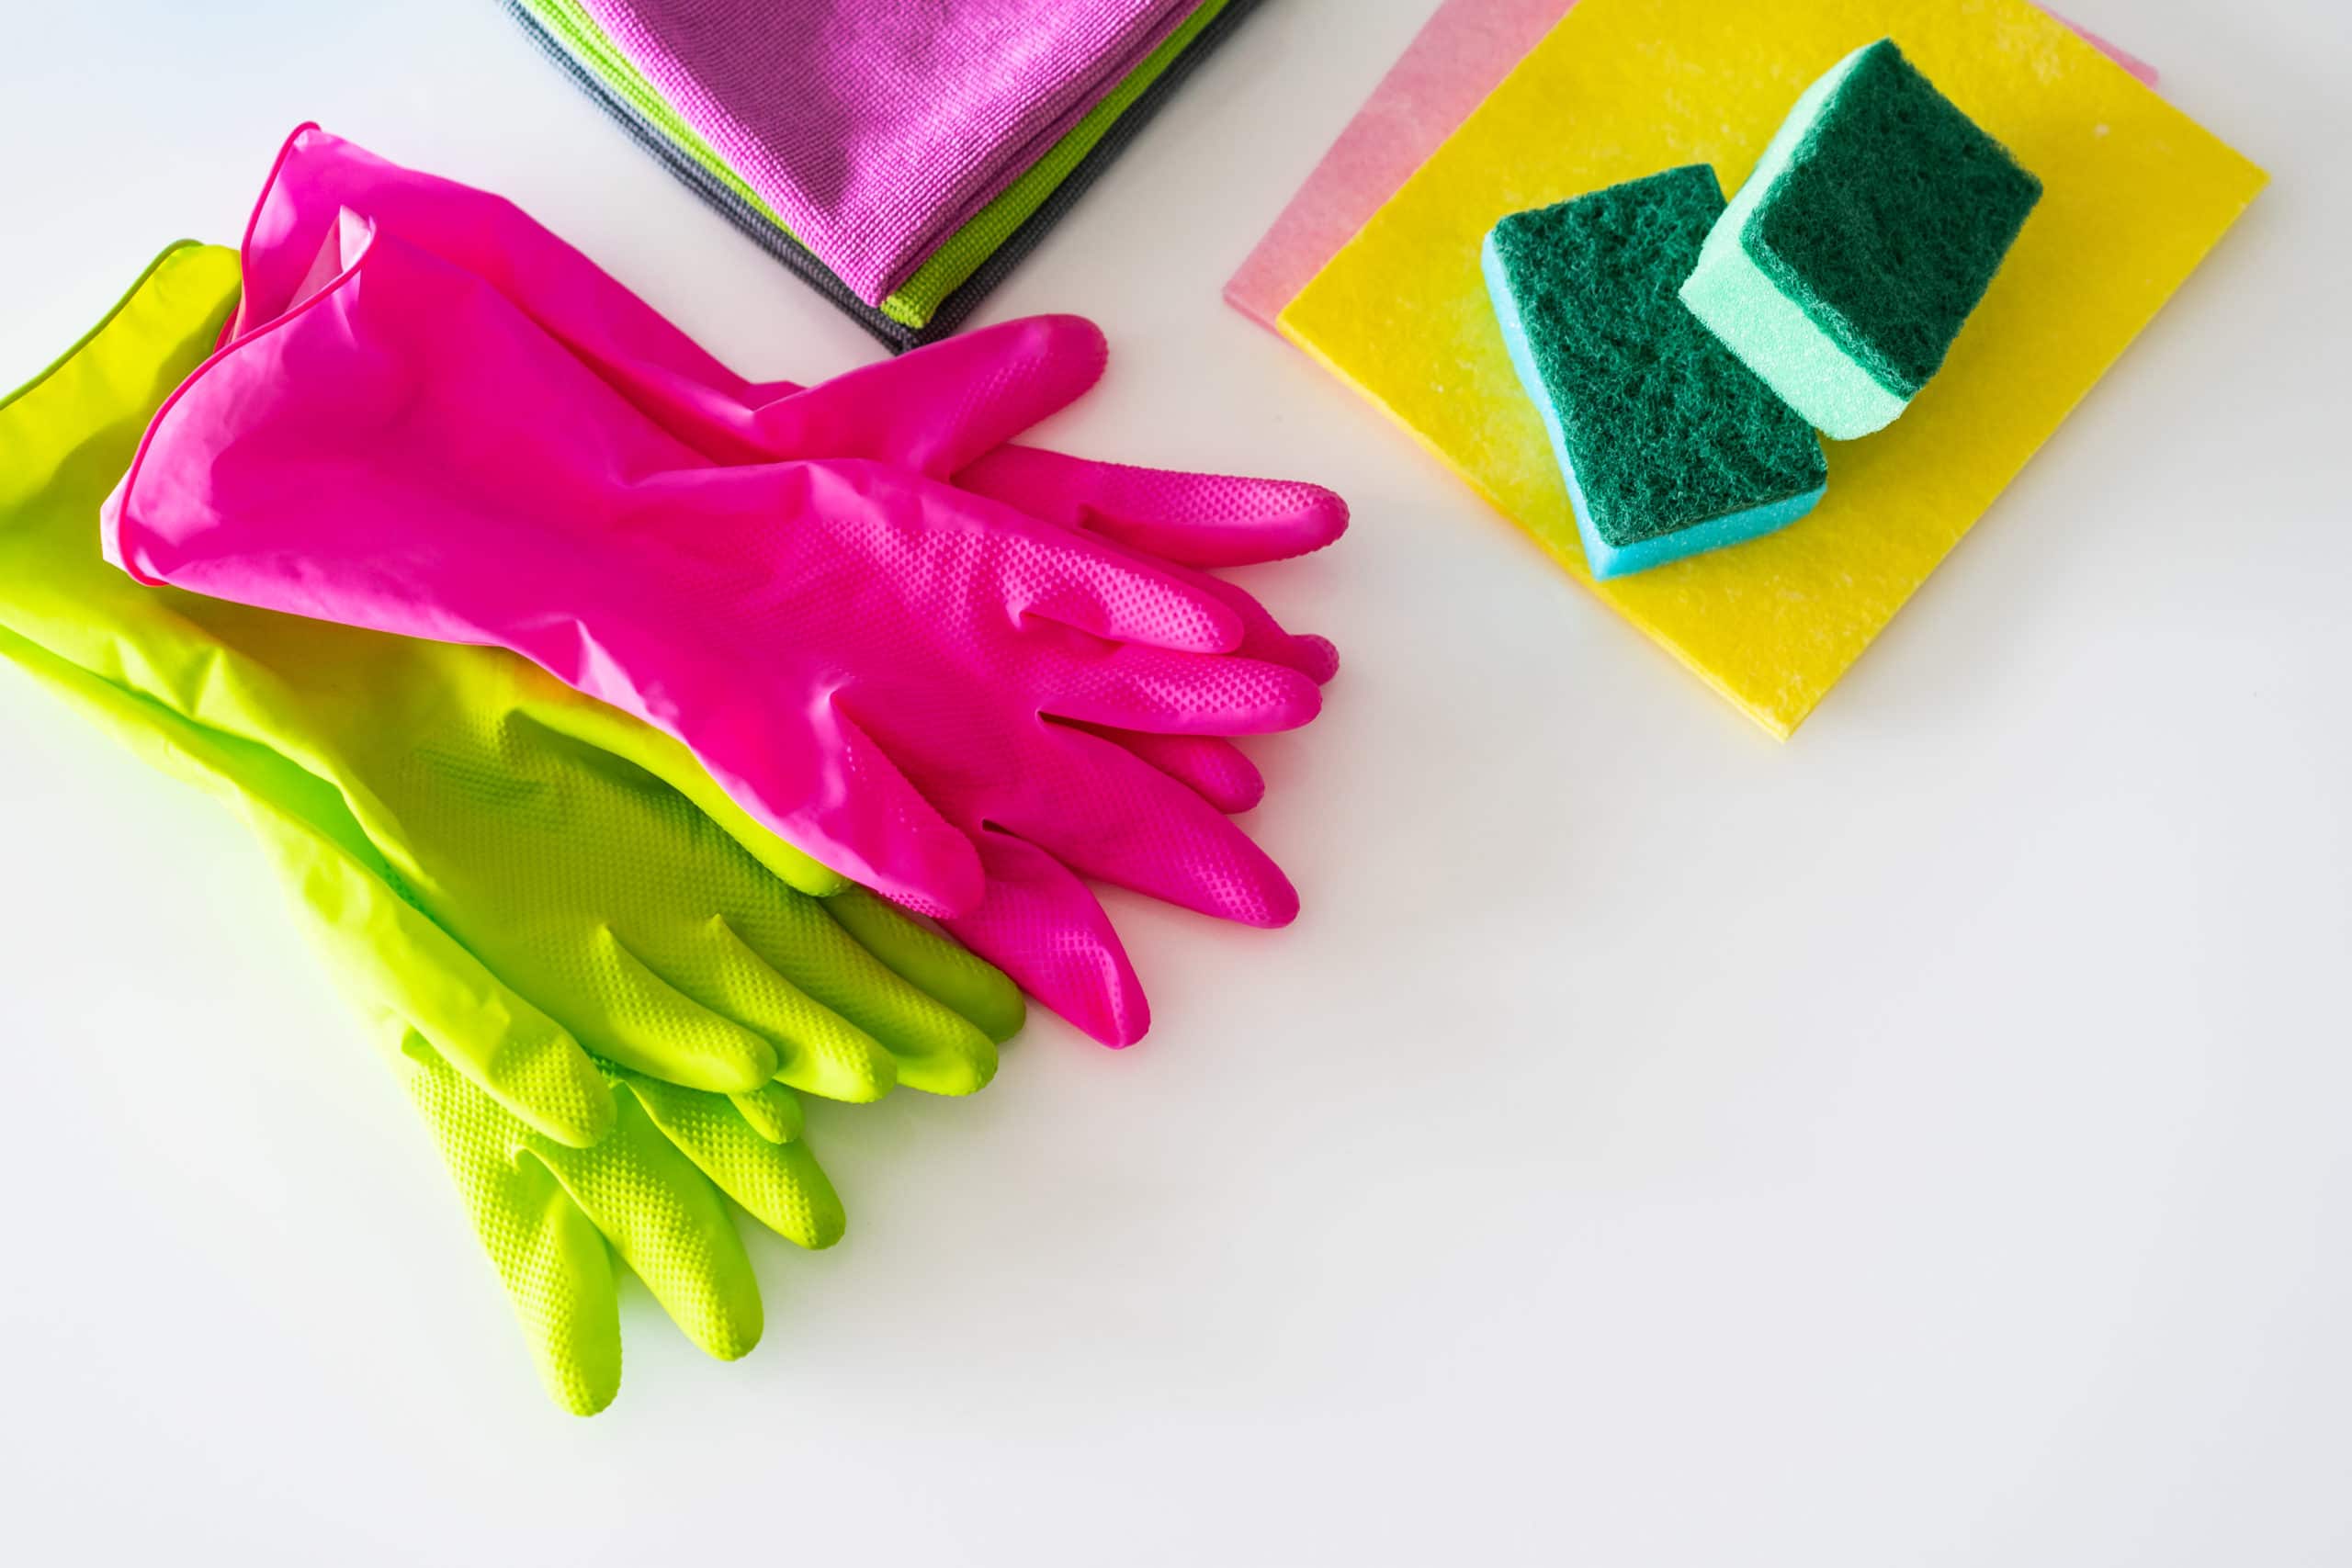 Cleaning gloves, sponges and clothes